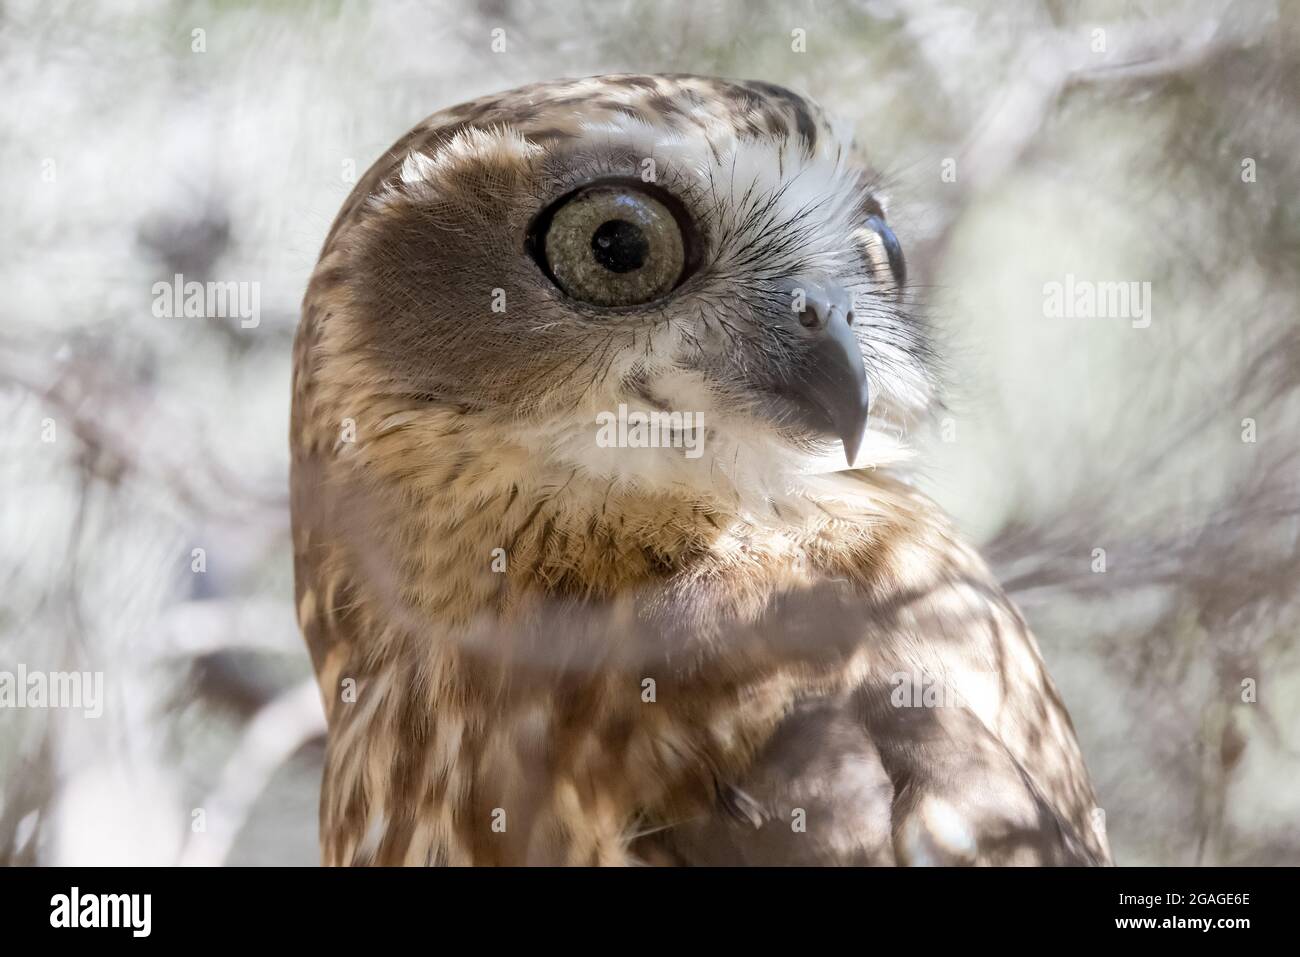 Southern Boobook Owl roosting by day in a bush Stock Photo